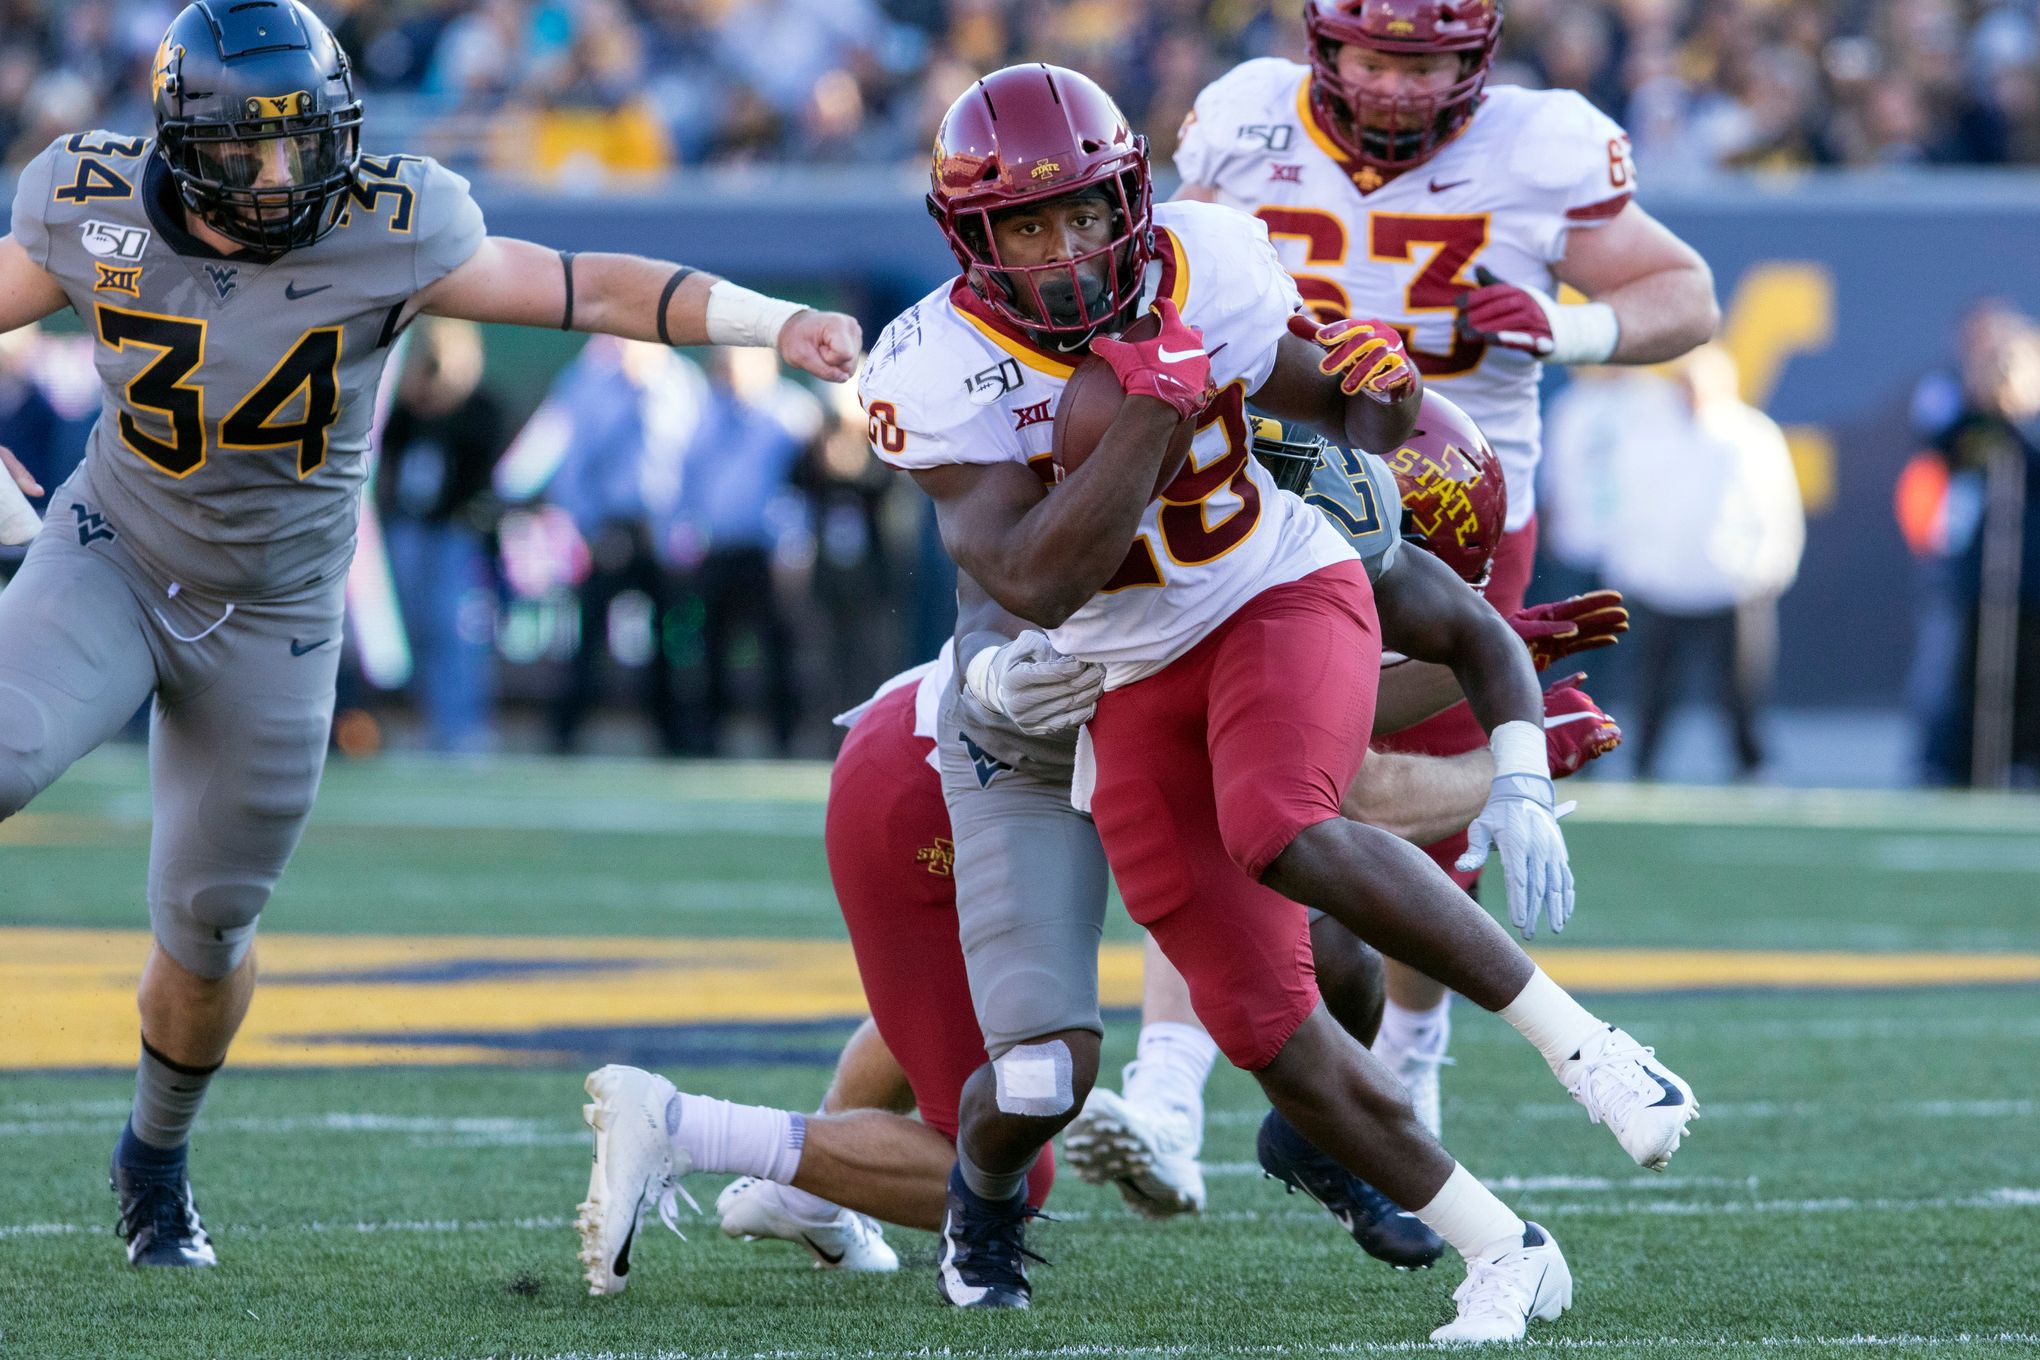 Freshman Breece Hall emerges at RB for Iowa State